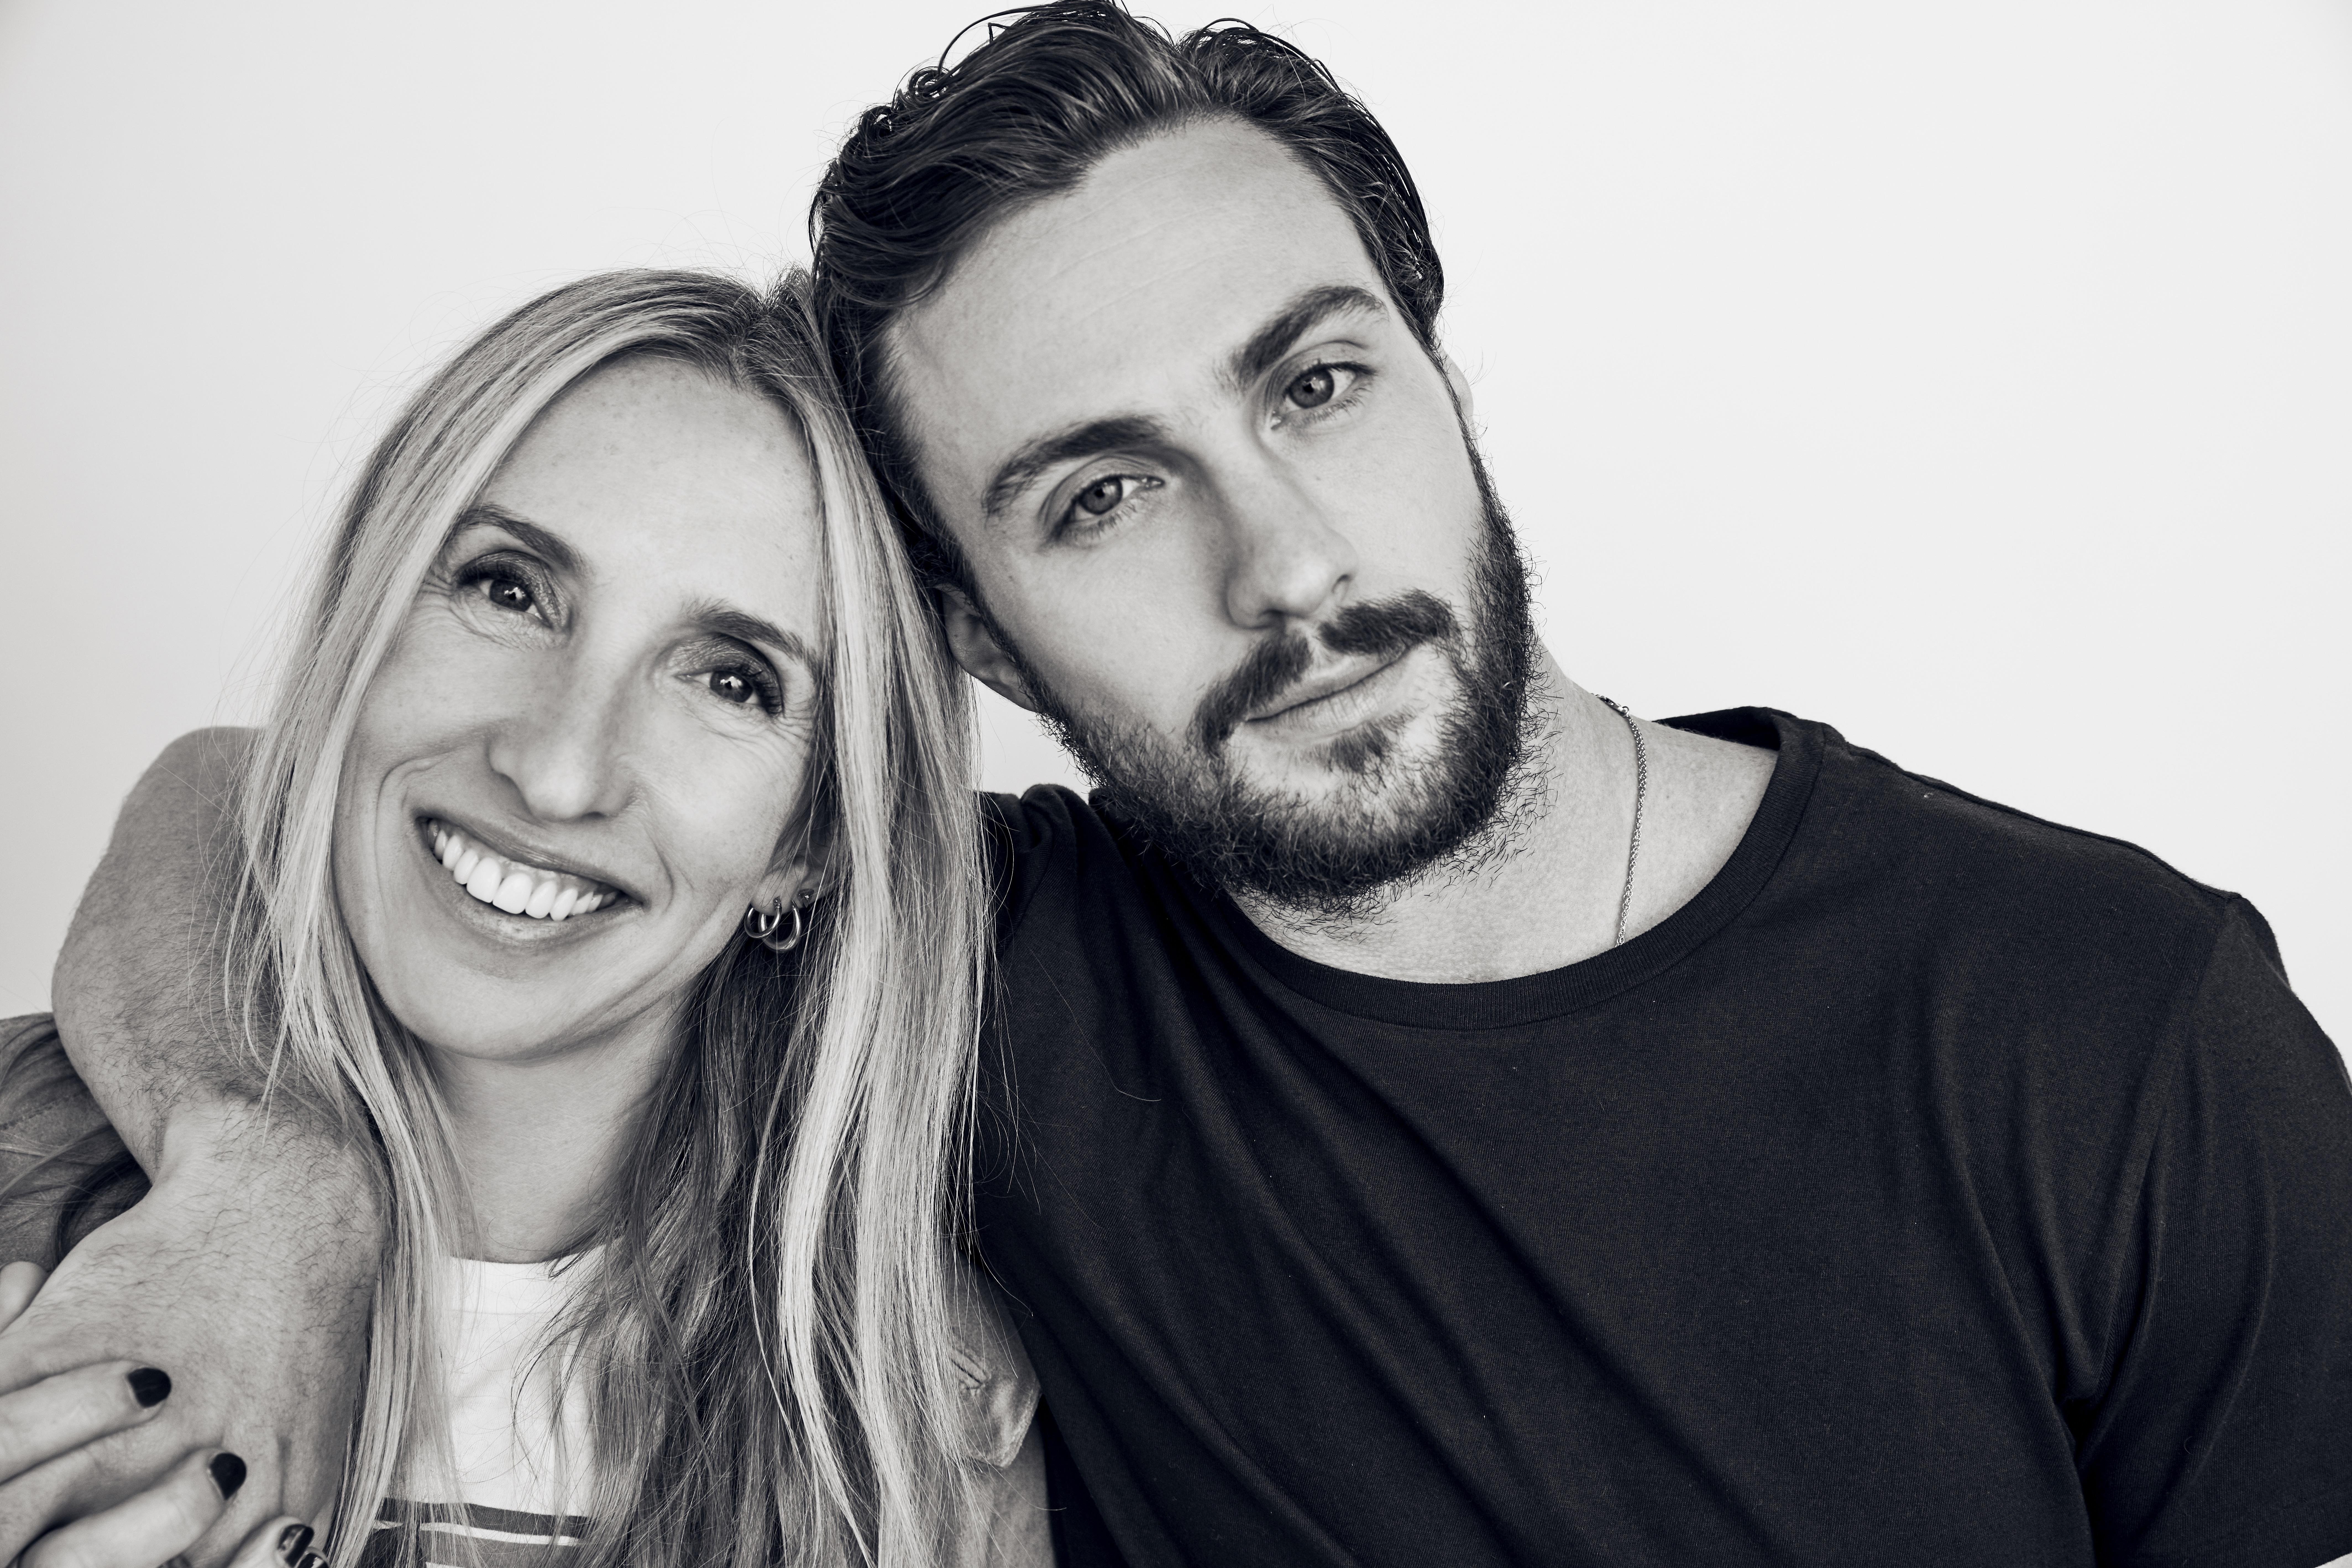 Sam Taylor-Johnson and Aaron Taylor-Johnson photographed at the Toronto International Film Festival in Canada in 2018 | Source: Getty Images